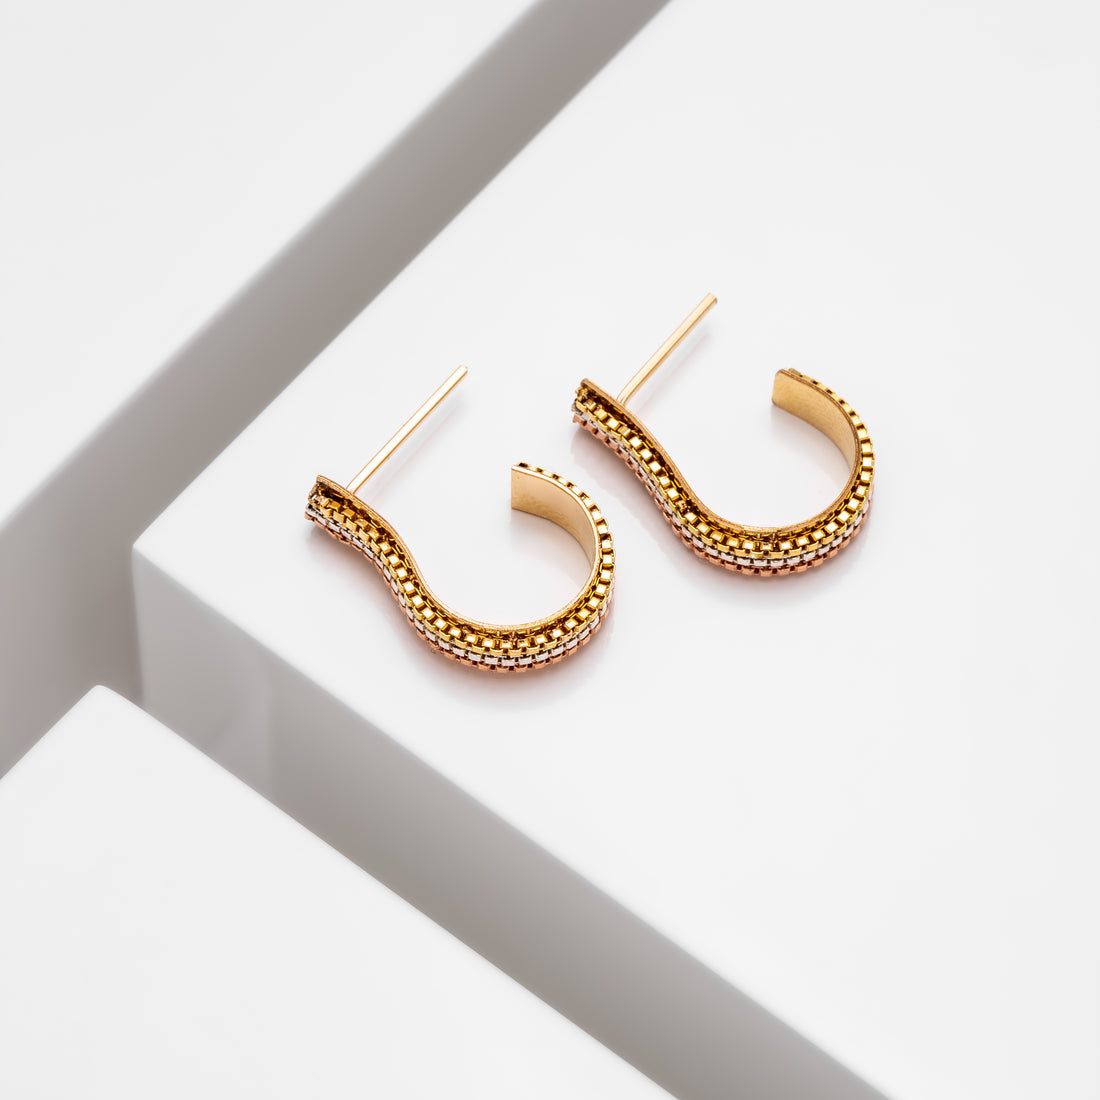 hoop earring with box chain design in mixed metal - 14k gold filled, sterling silver and rose gold